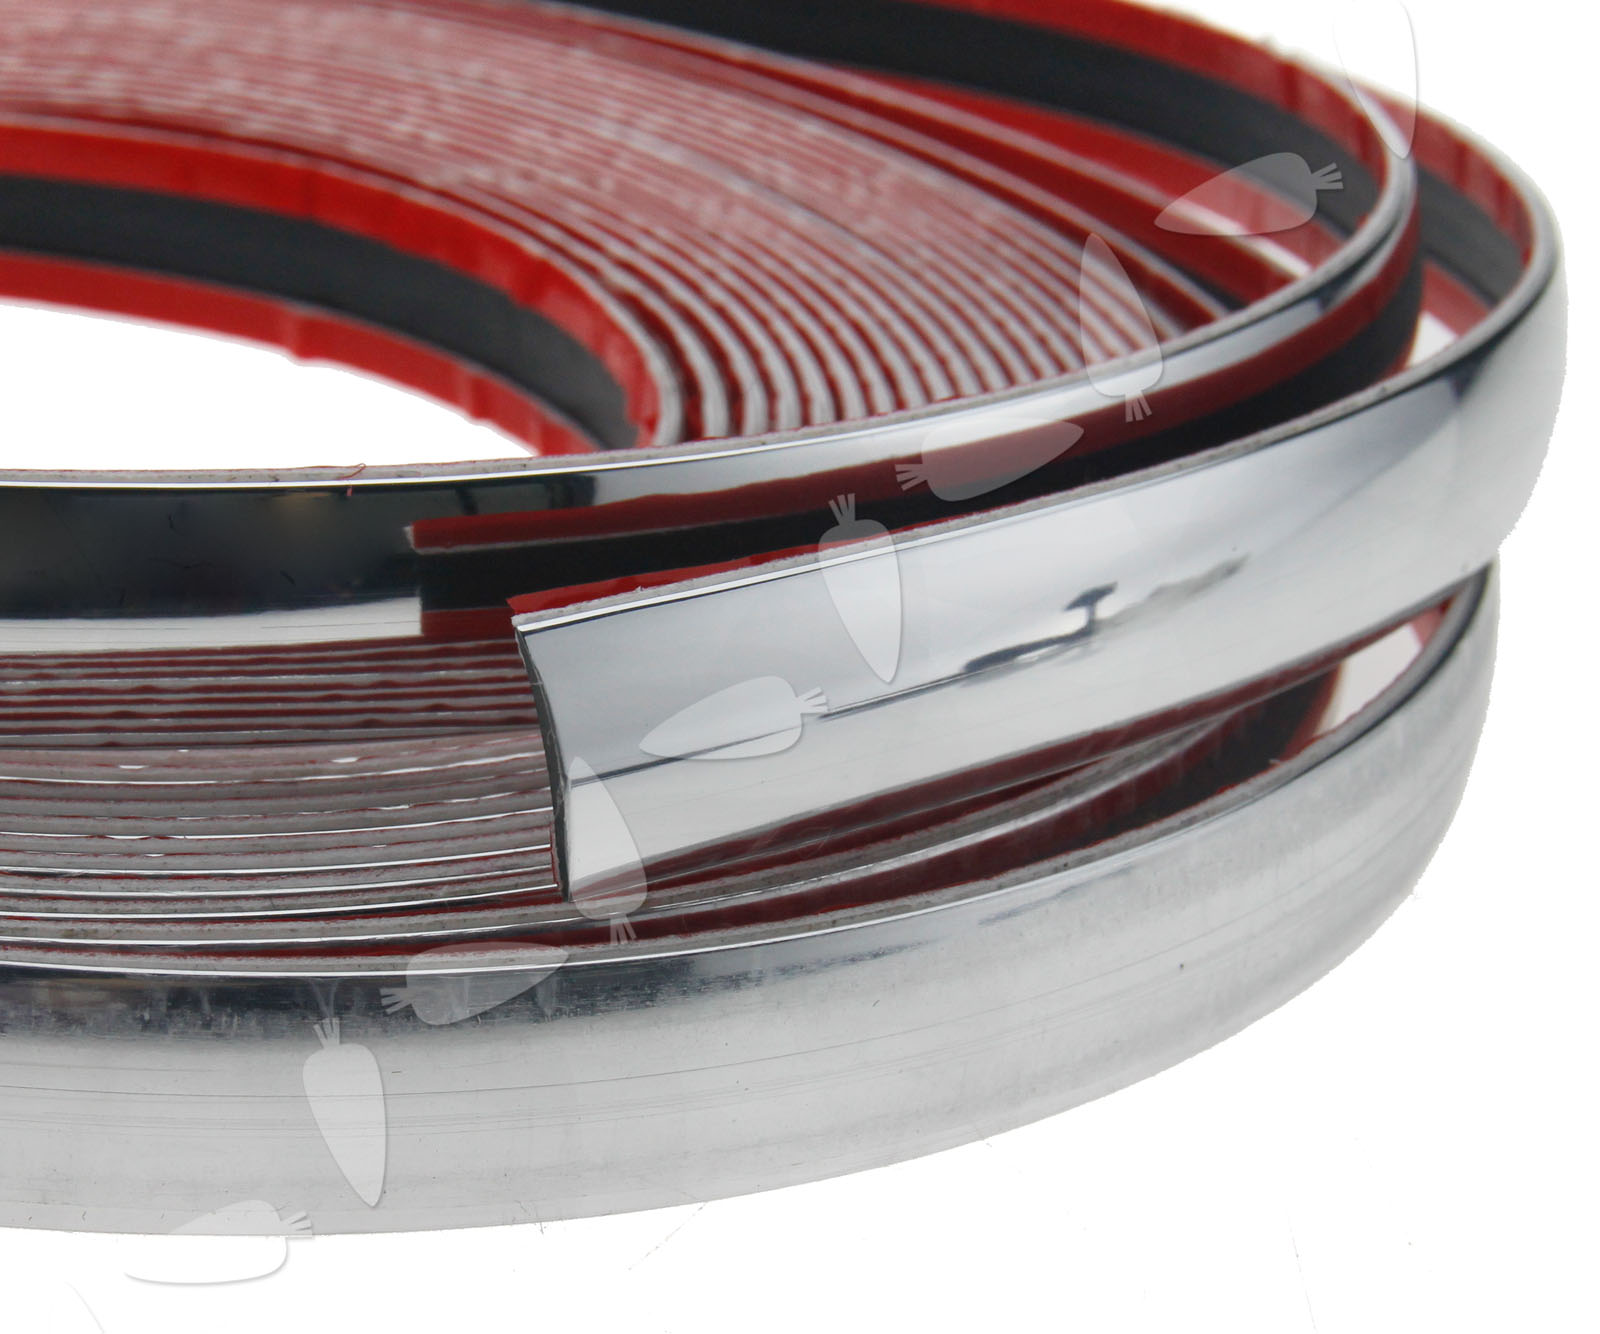 Chrome Styling Moulding Trim Strip Mm X Ft For Cars Vehicles Ebay